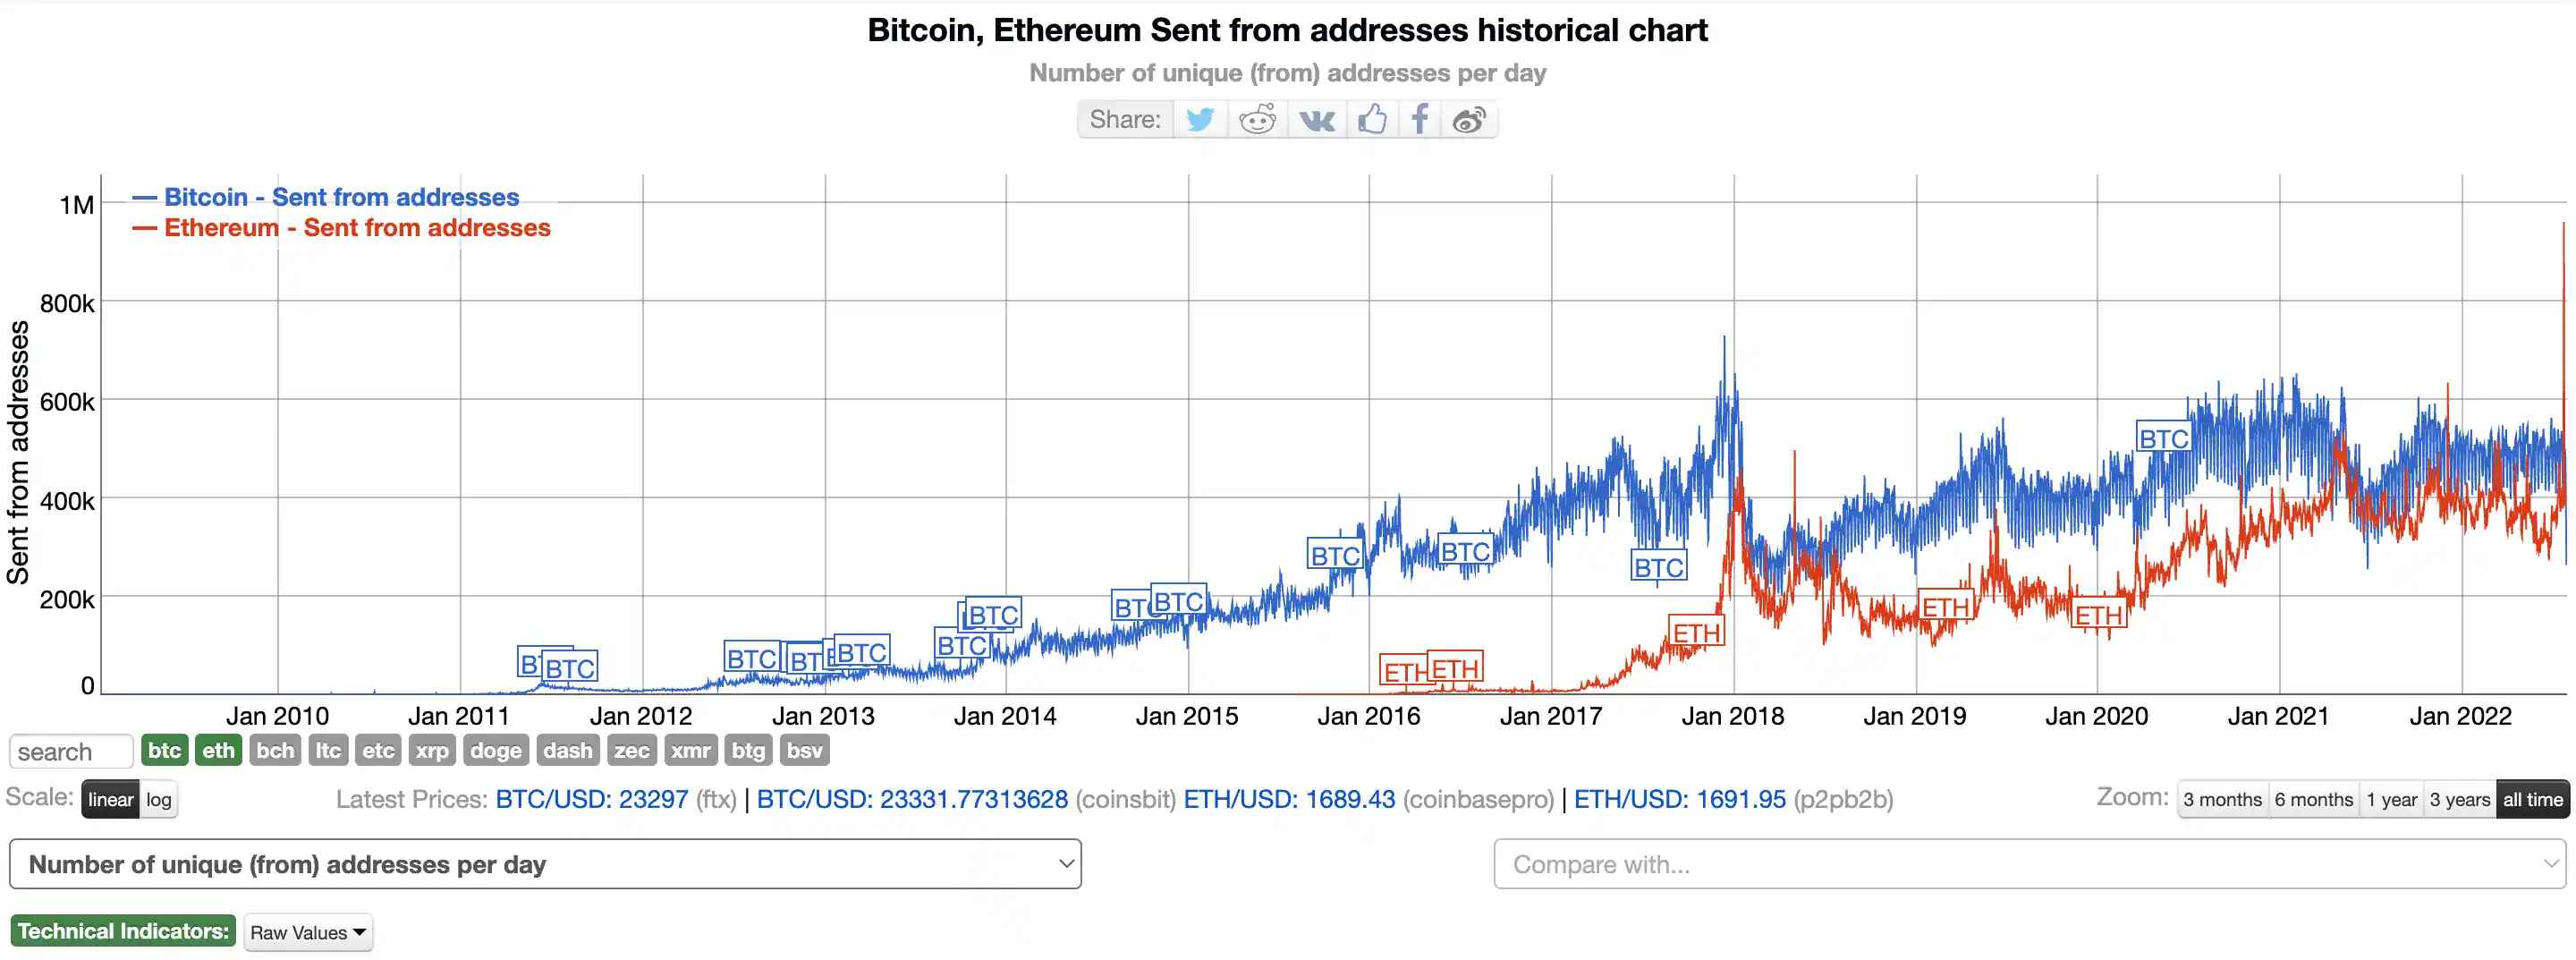 Number of unique (from) addresses per day in Ethereum and Bitcoin